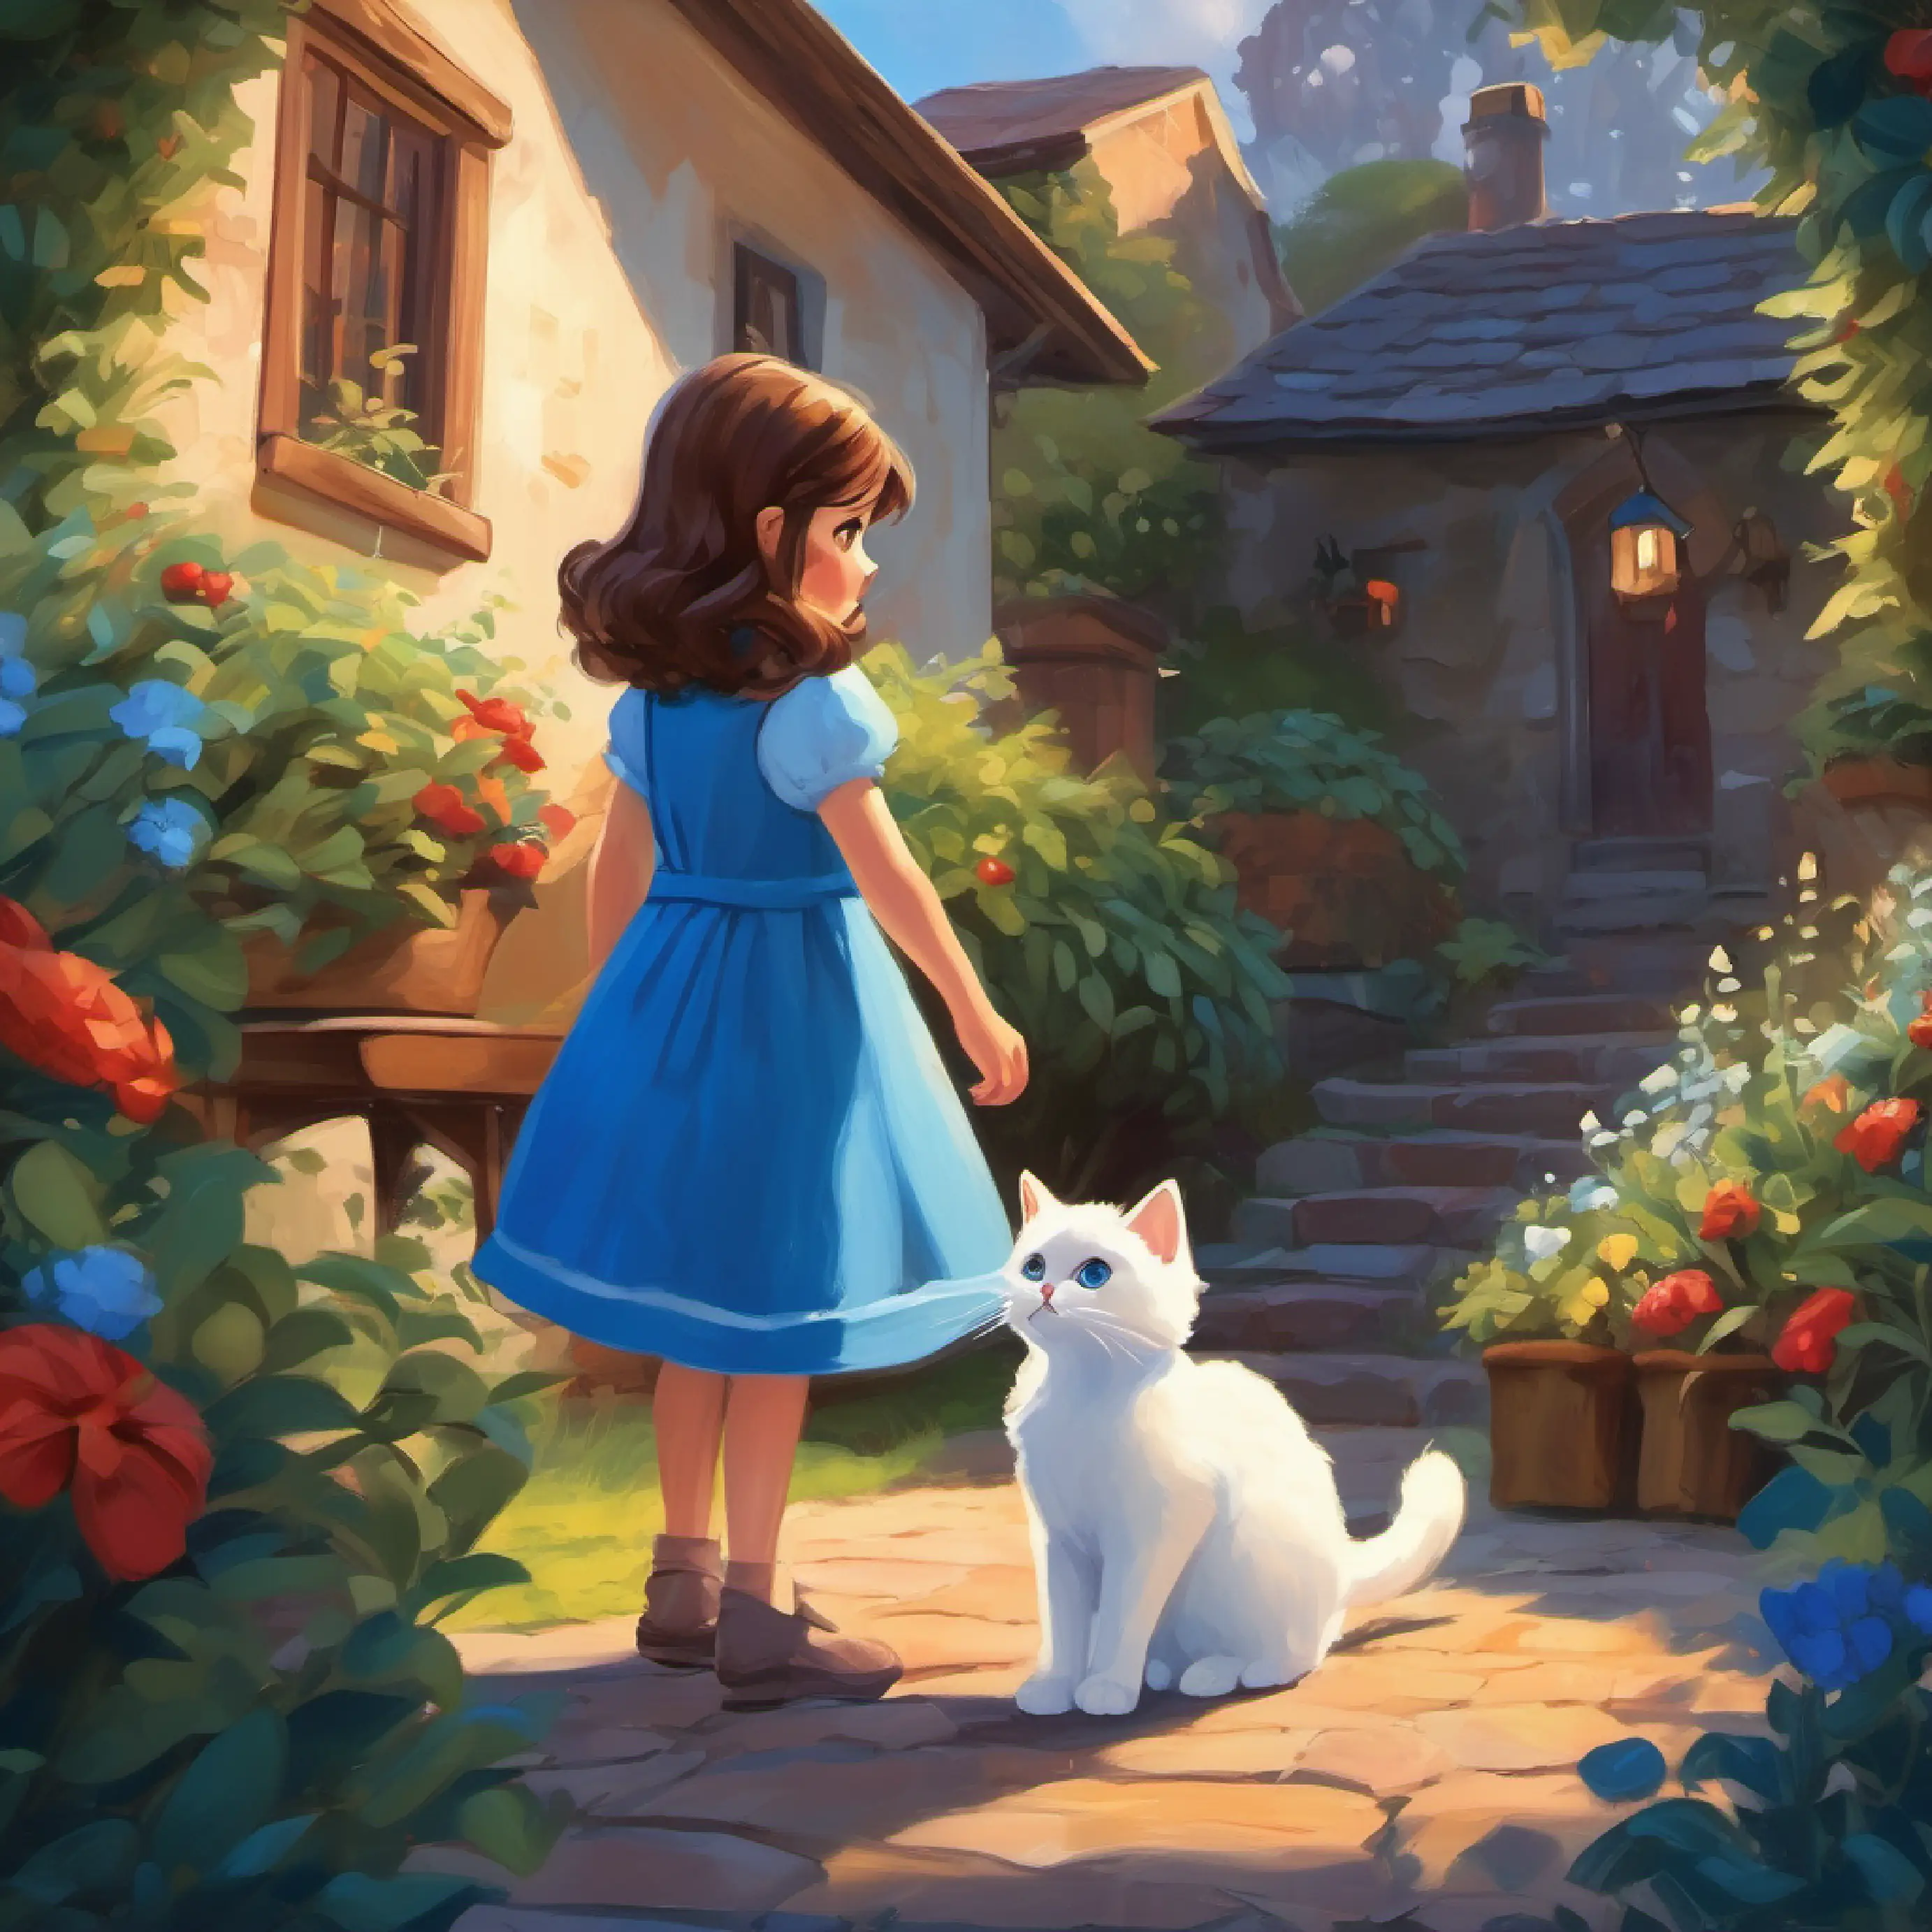 A girl with brown hair and eyes, wearing a blue dress approaches A small white cat with bright blue eyes, very fluffy, offering friendship, backyard setting.